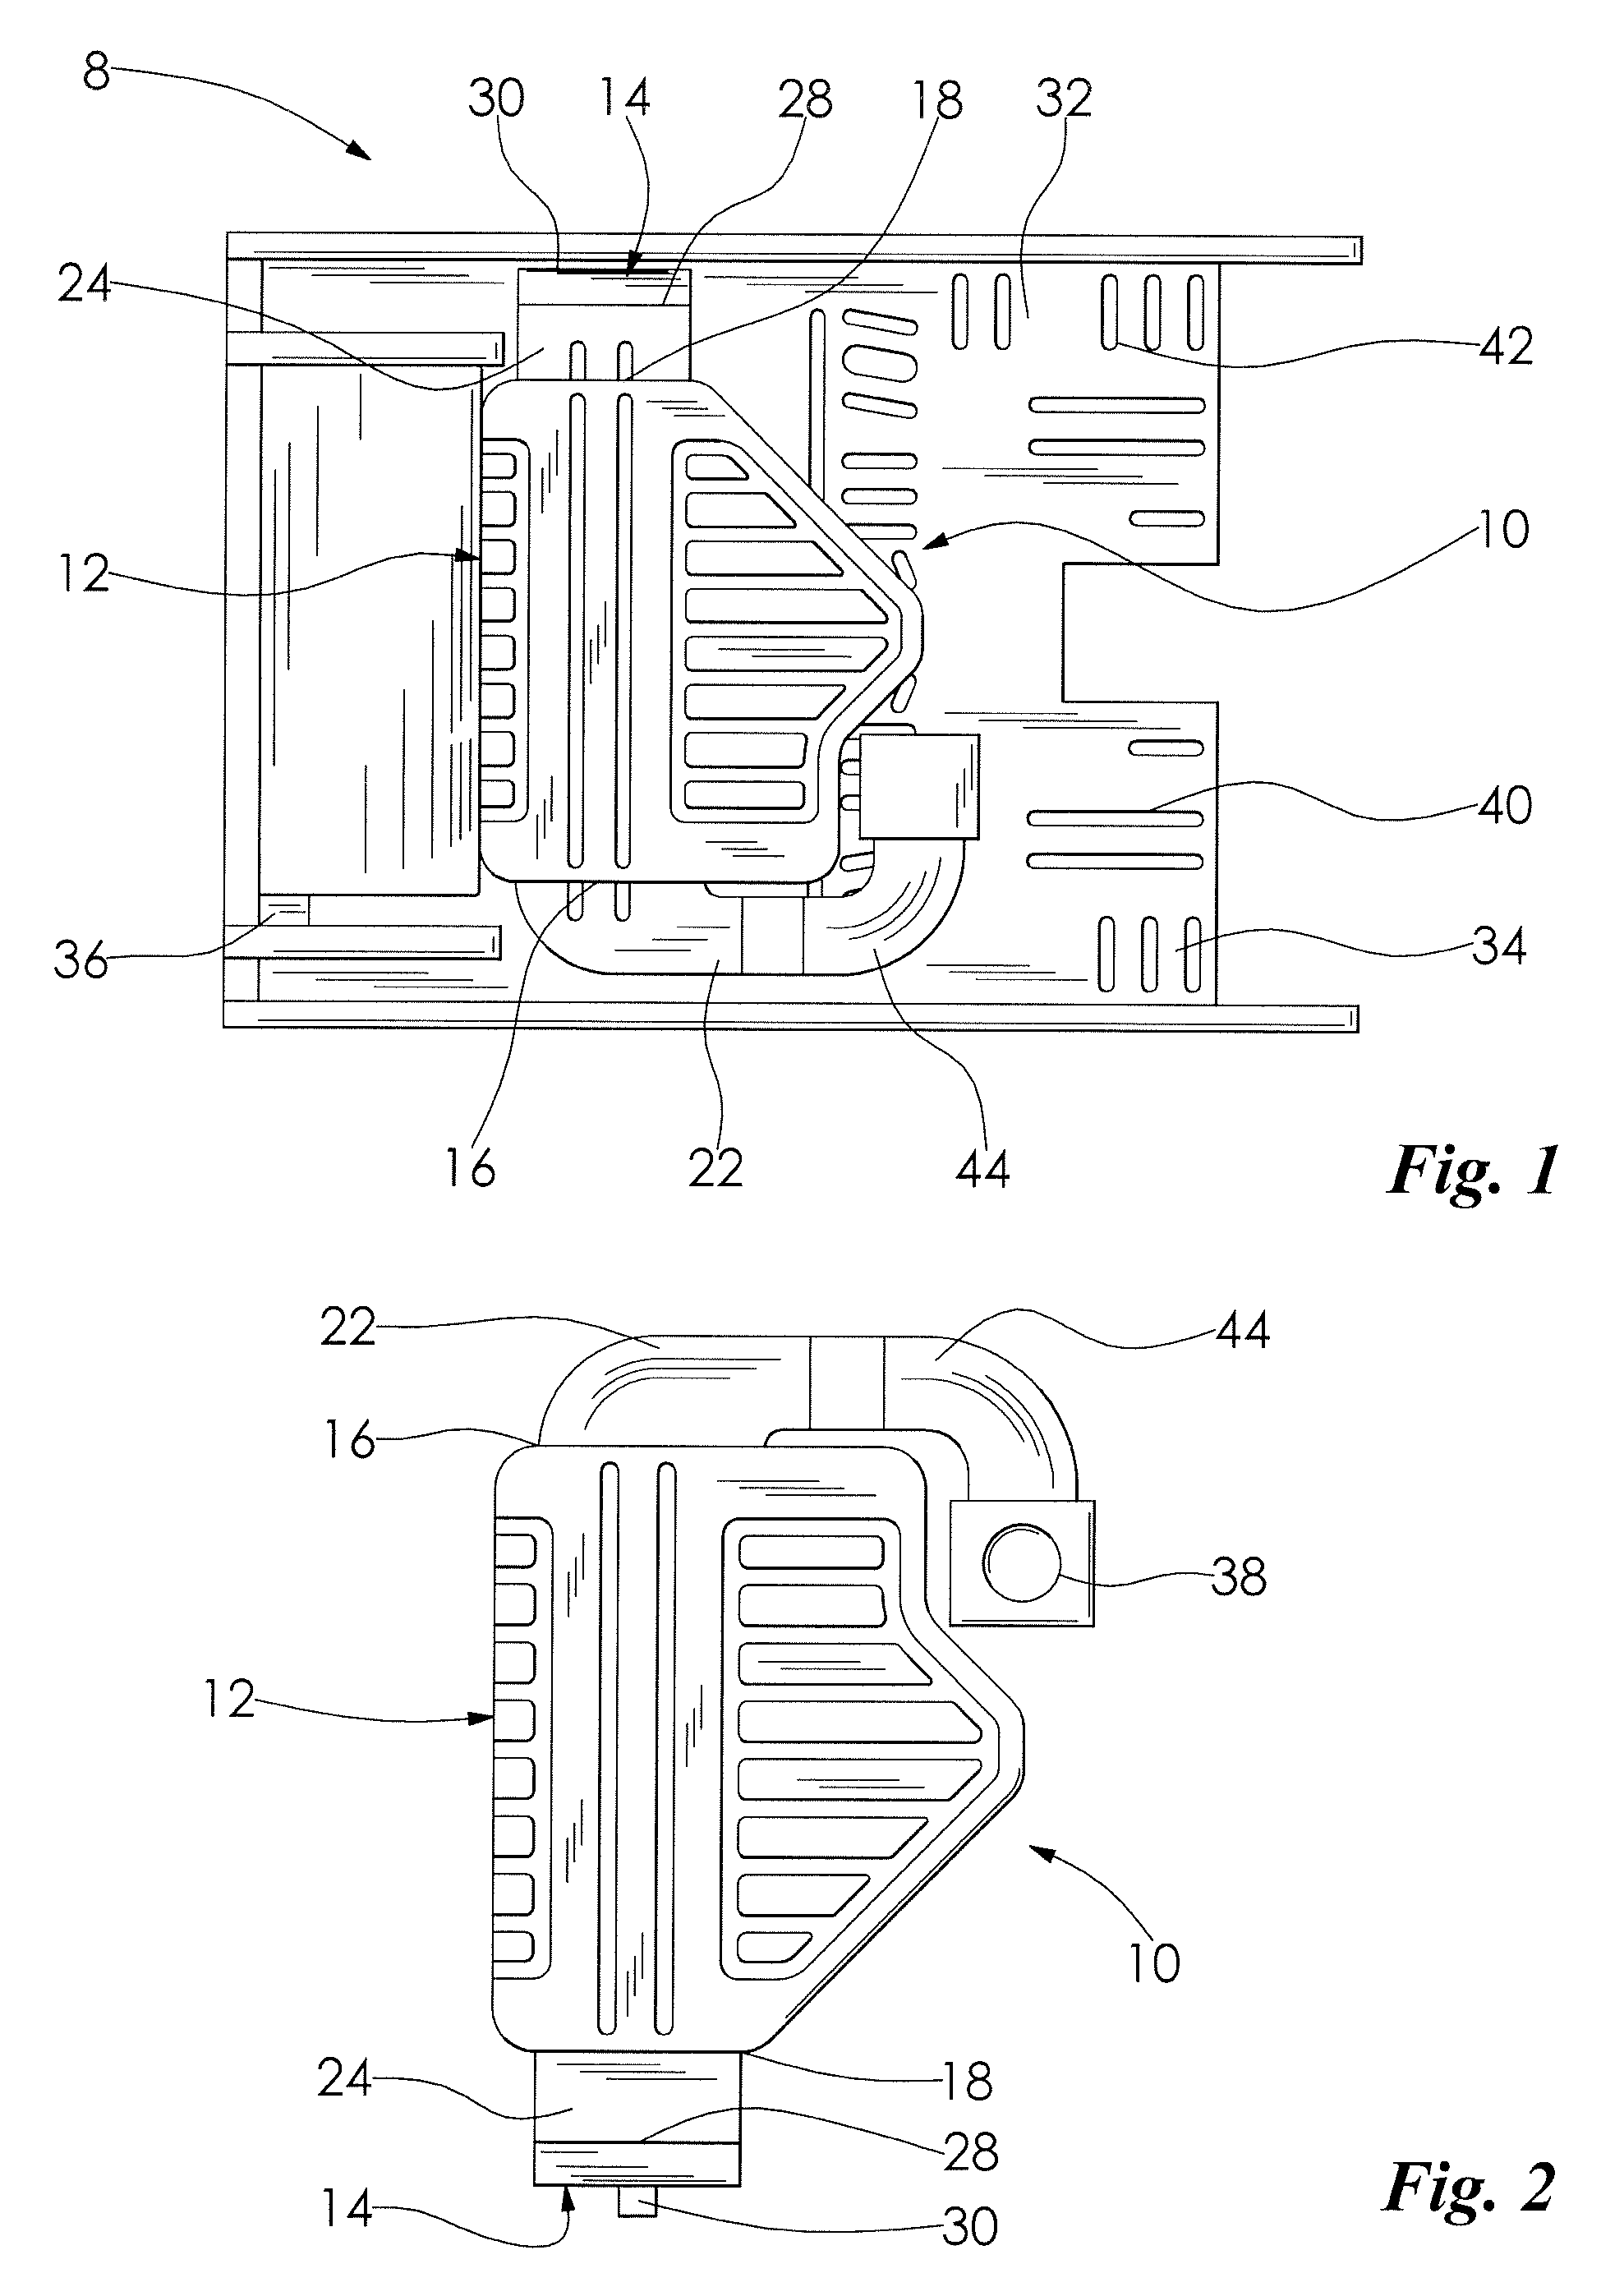 High voltage battery with a pulling ventilator in a fuel cell vehicle